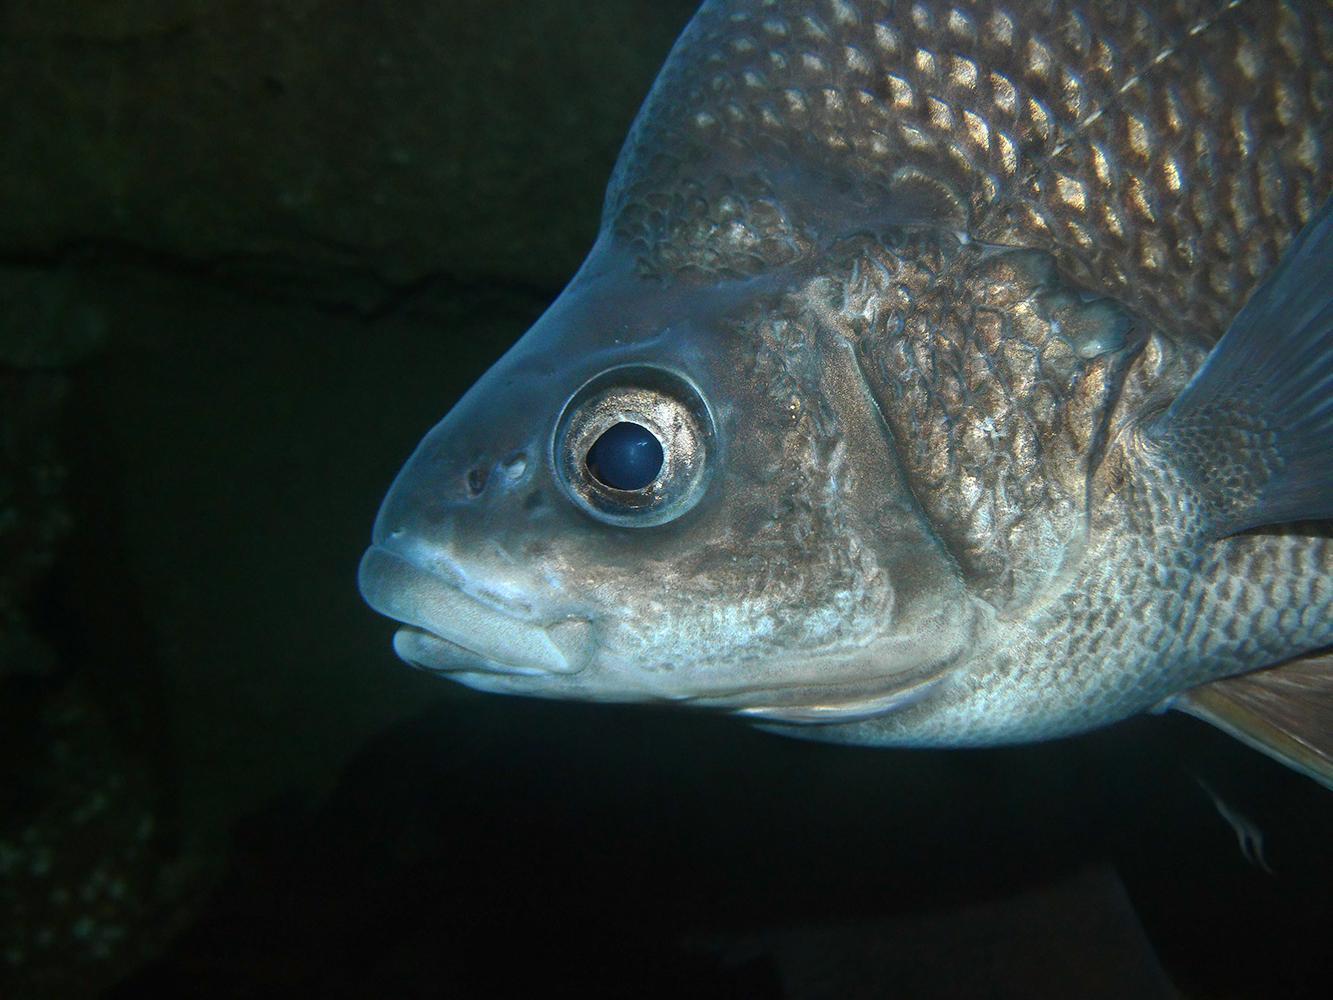 Underwater image of a macquarie perch. Only the fish's head is visible.